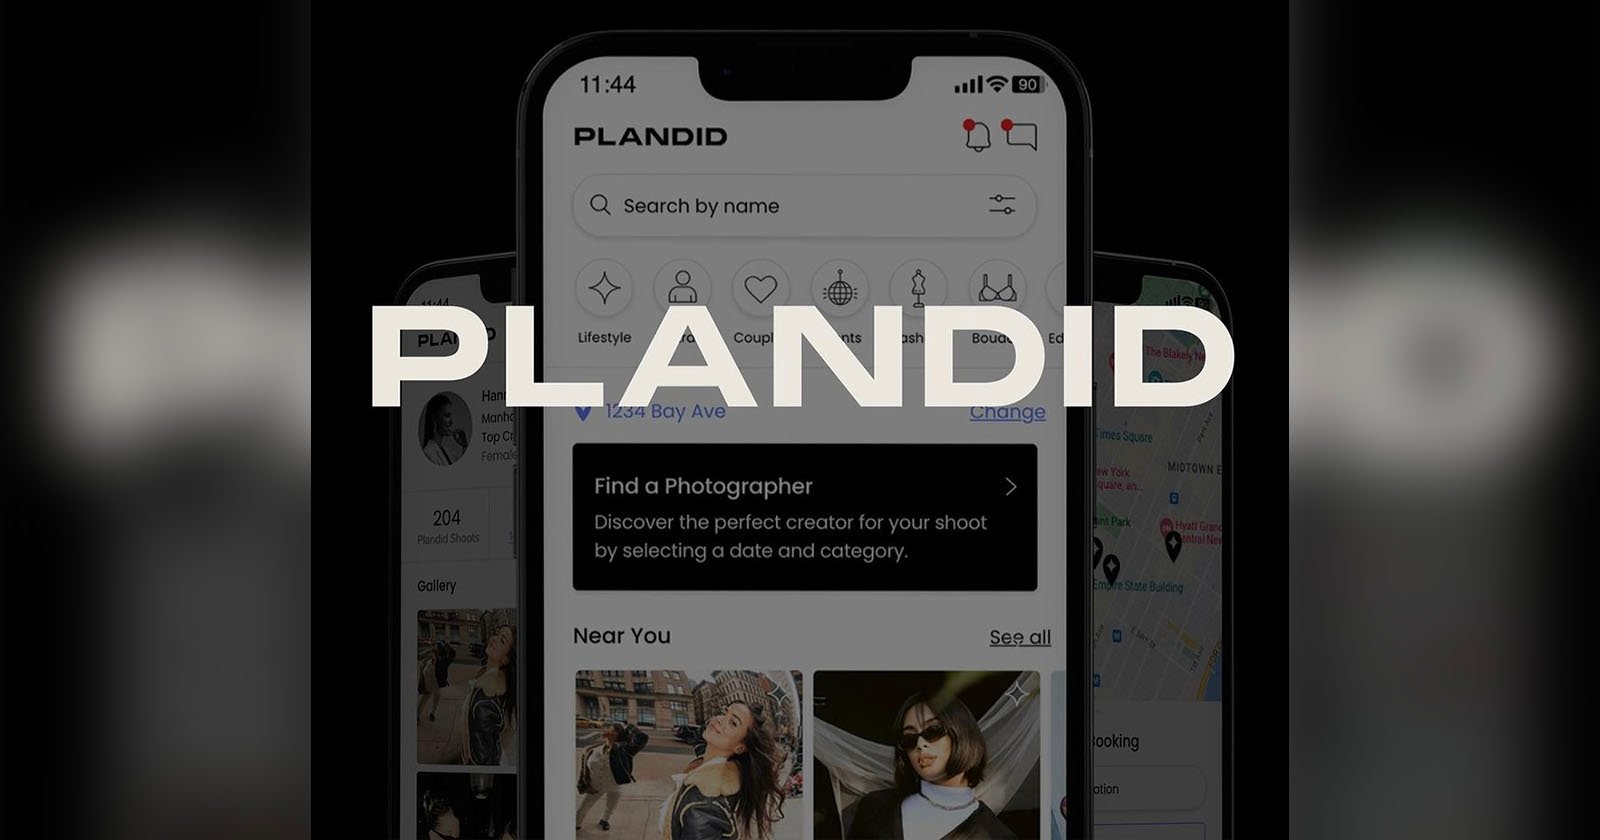  plandid app allows instantly book photographer 